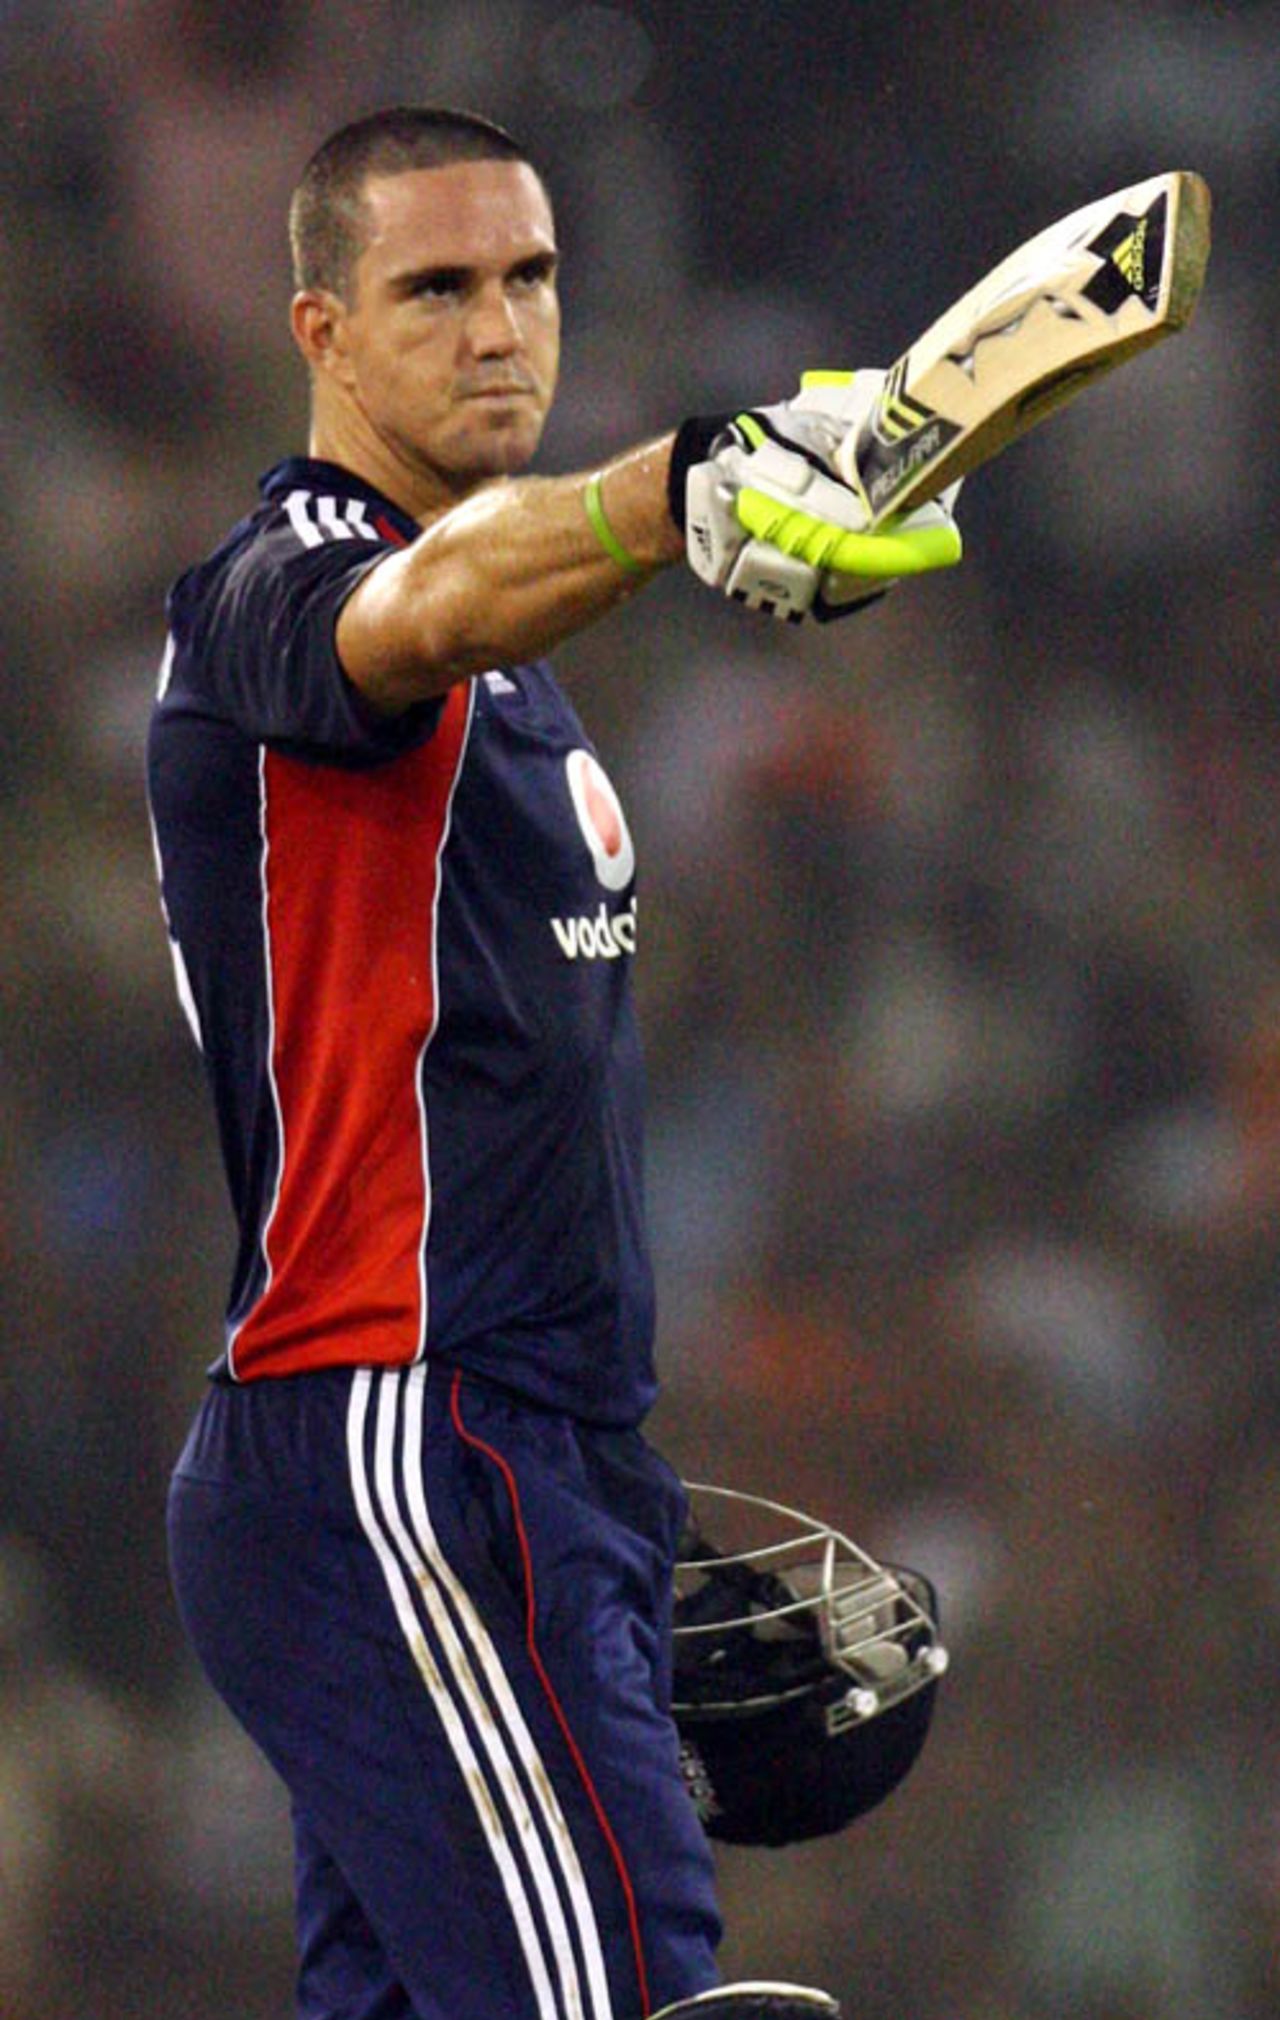 Kevin Pietersen acknowledges his century, India v England, 5th ODI, Cuttack, November 26, 2008